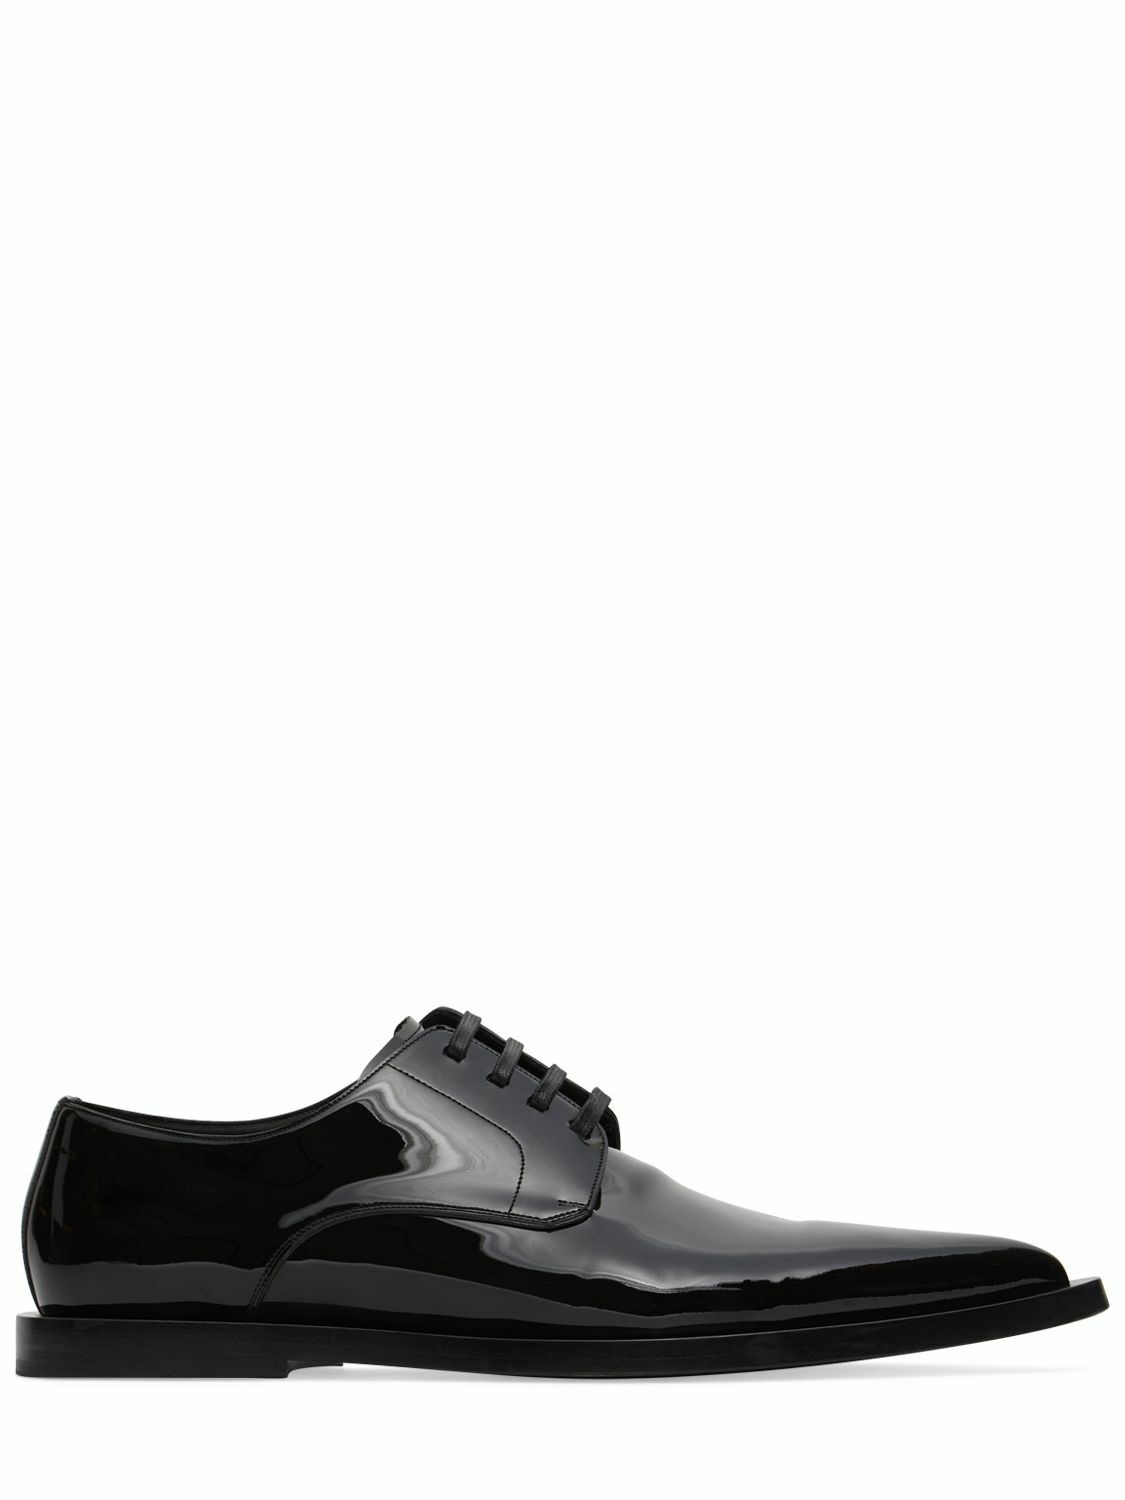 Photo: DOLCE & GABBANA - Achille Patent Leather Derby Shoes